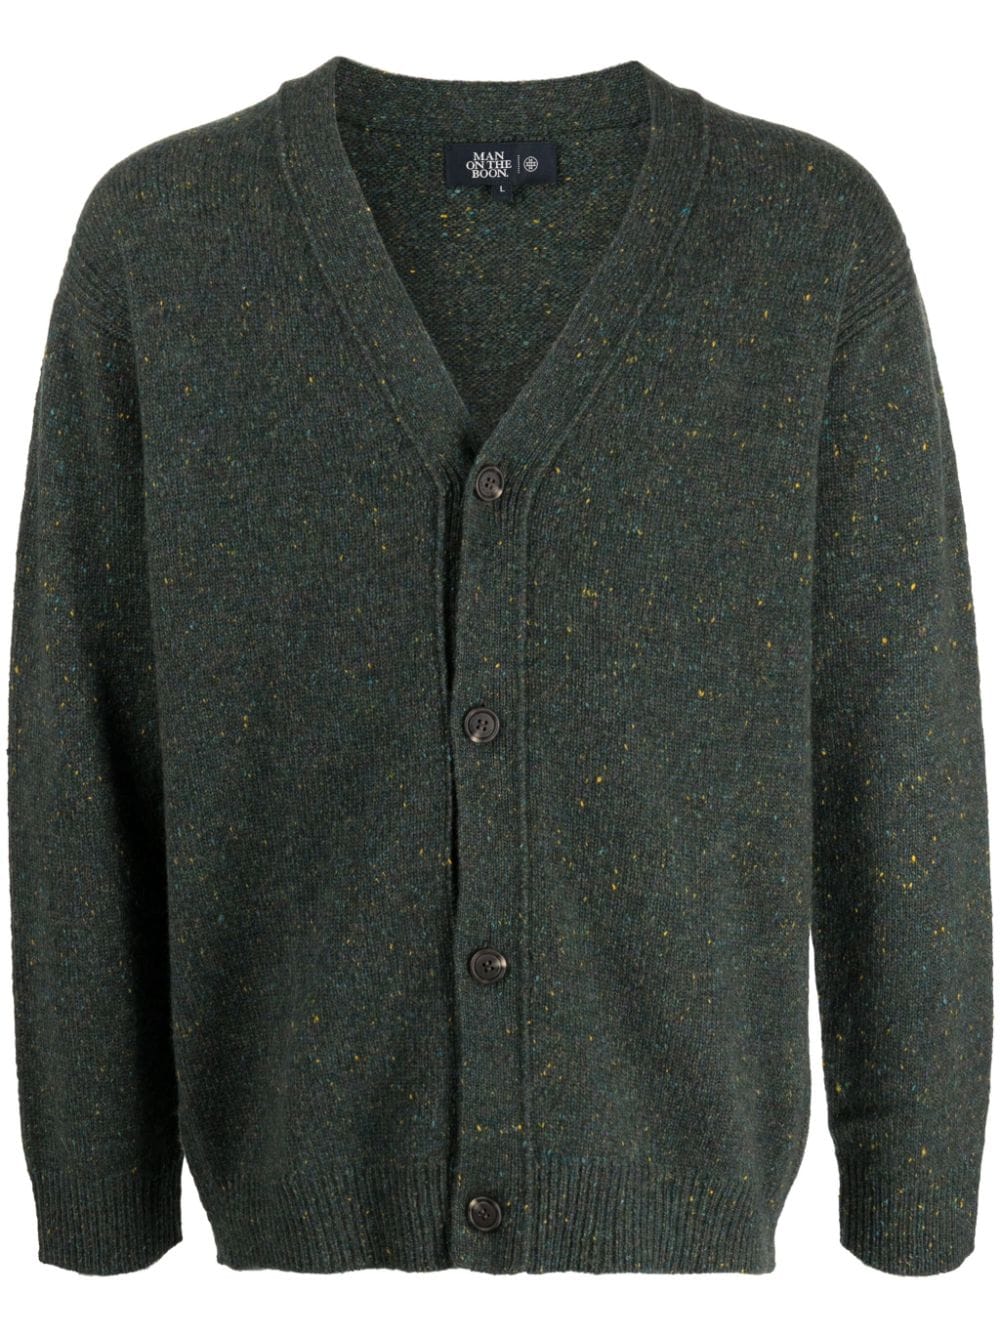 Man On The Boon. V-neck Button-up Cardigan In Green